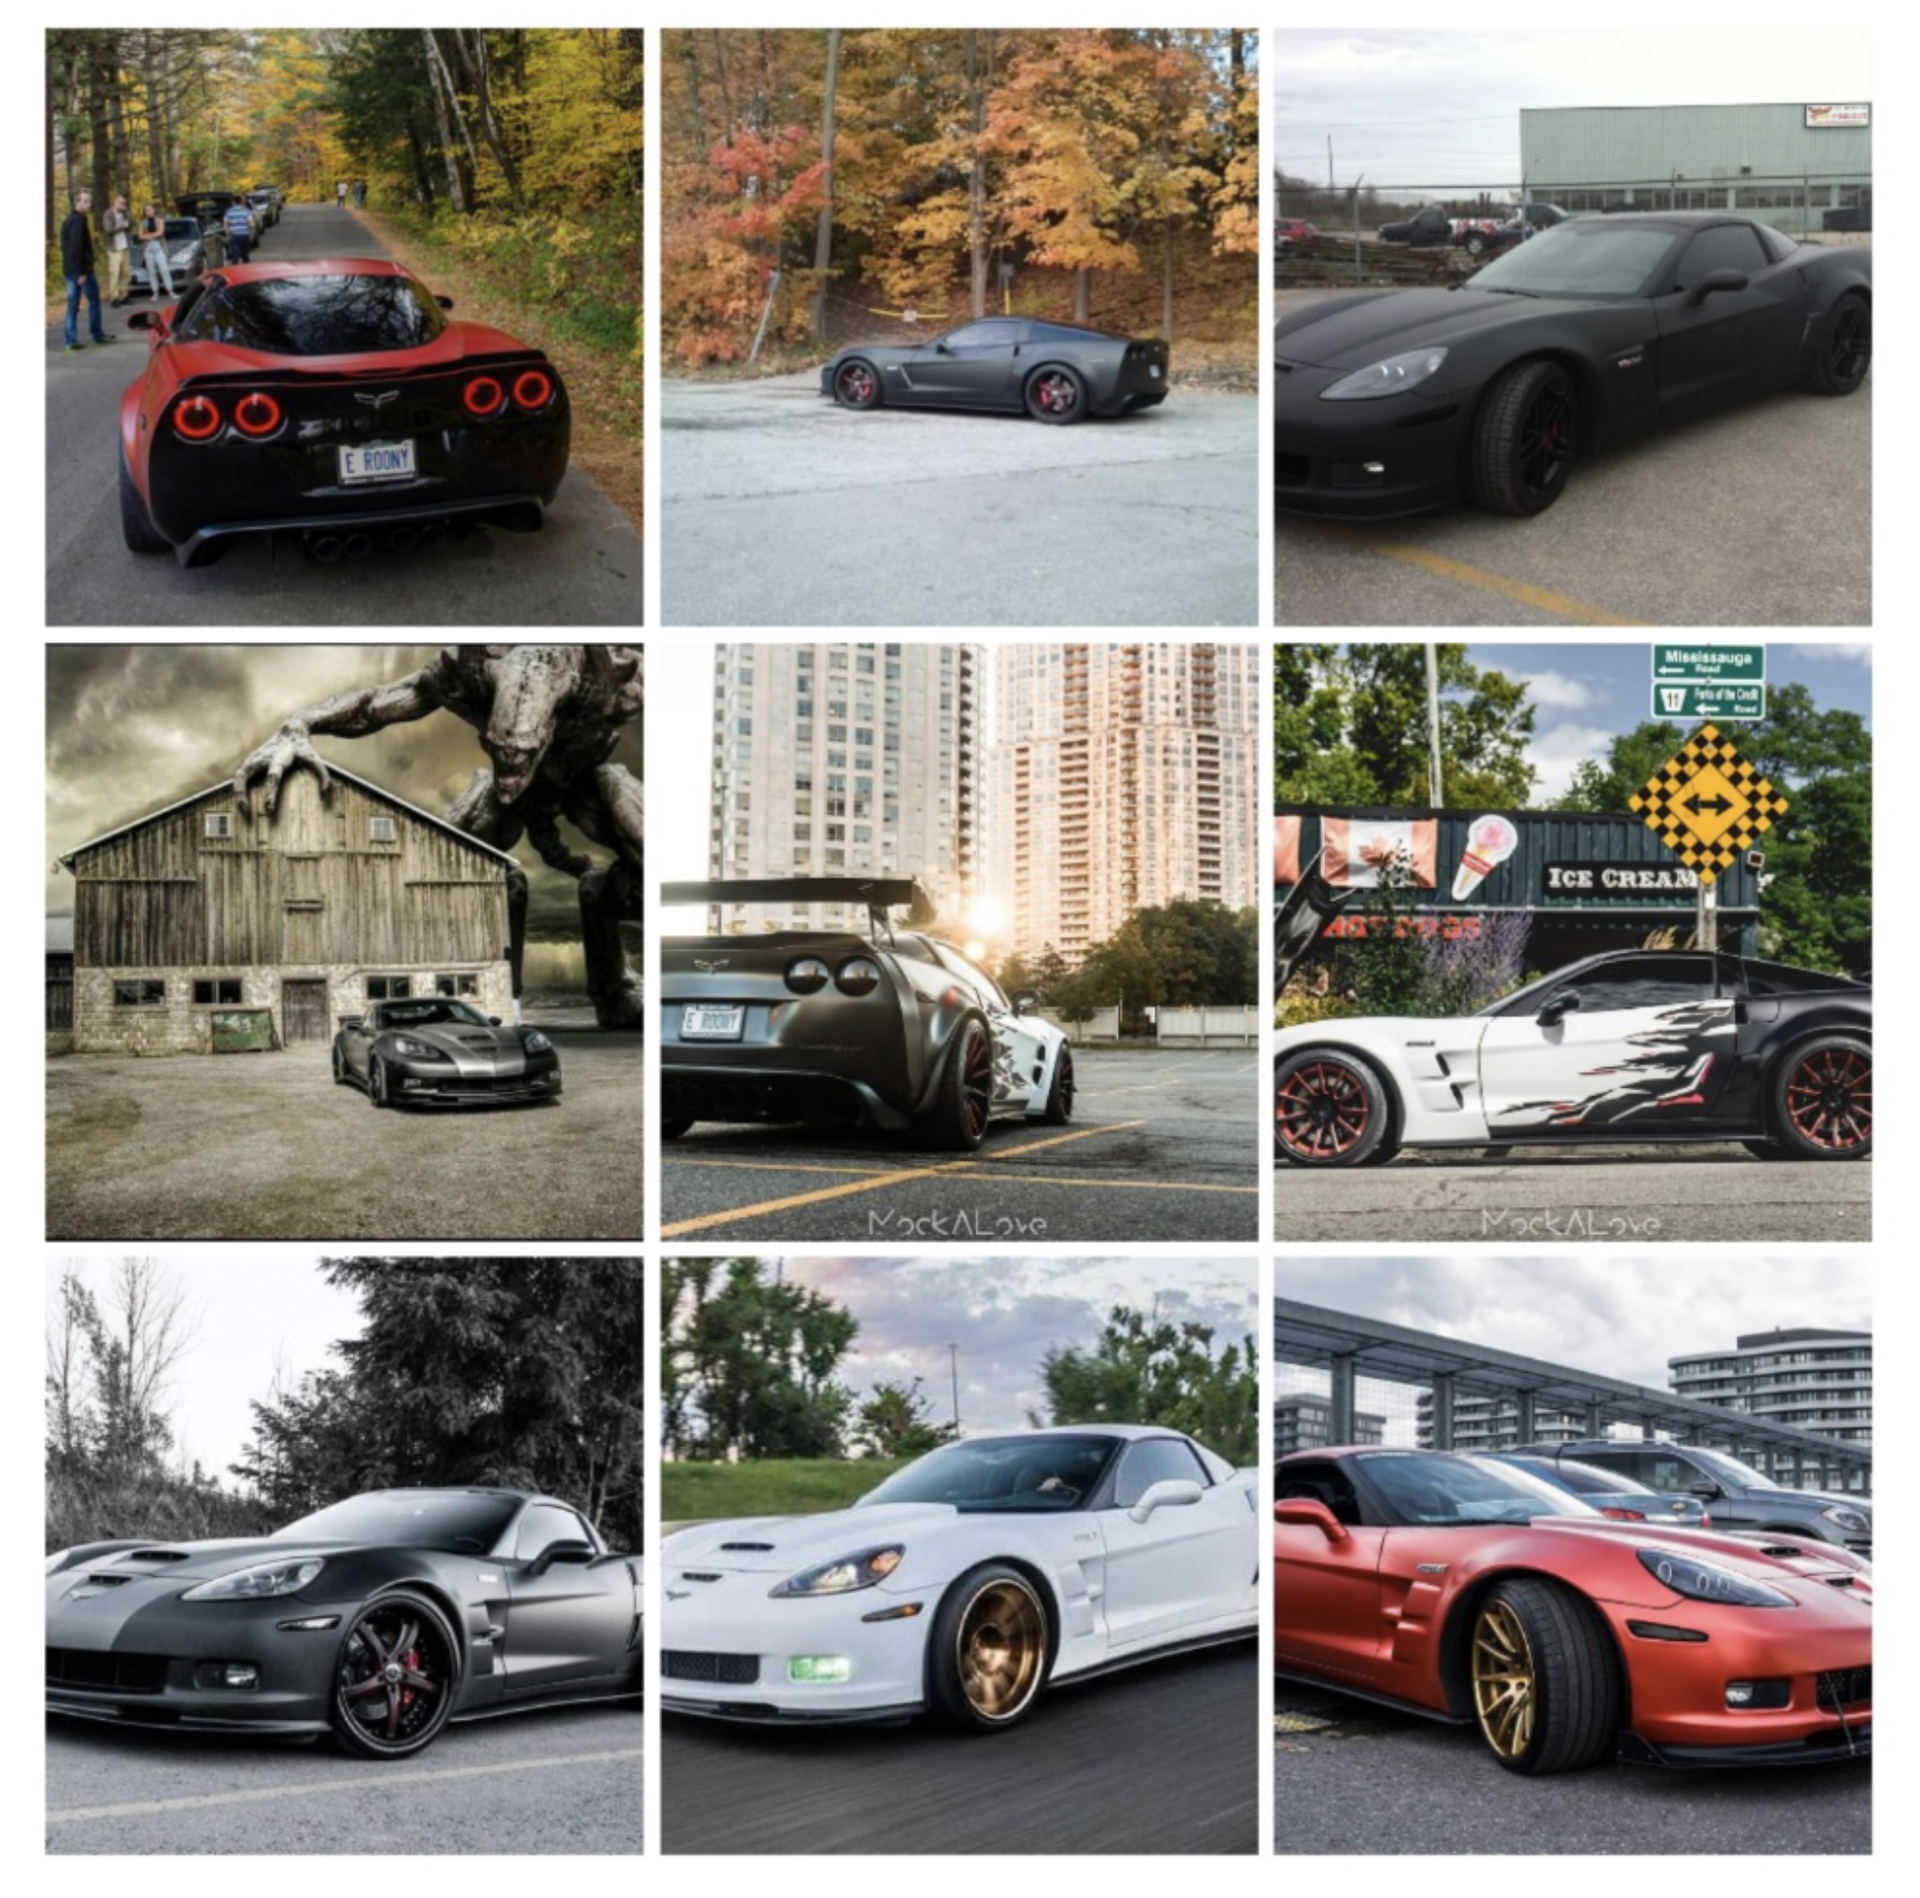 Collage of various wraps the Z06 has had